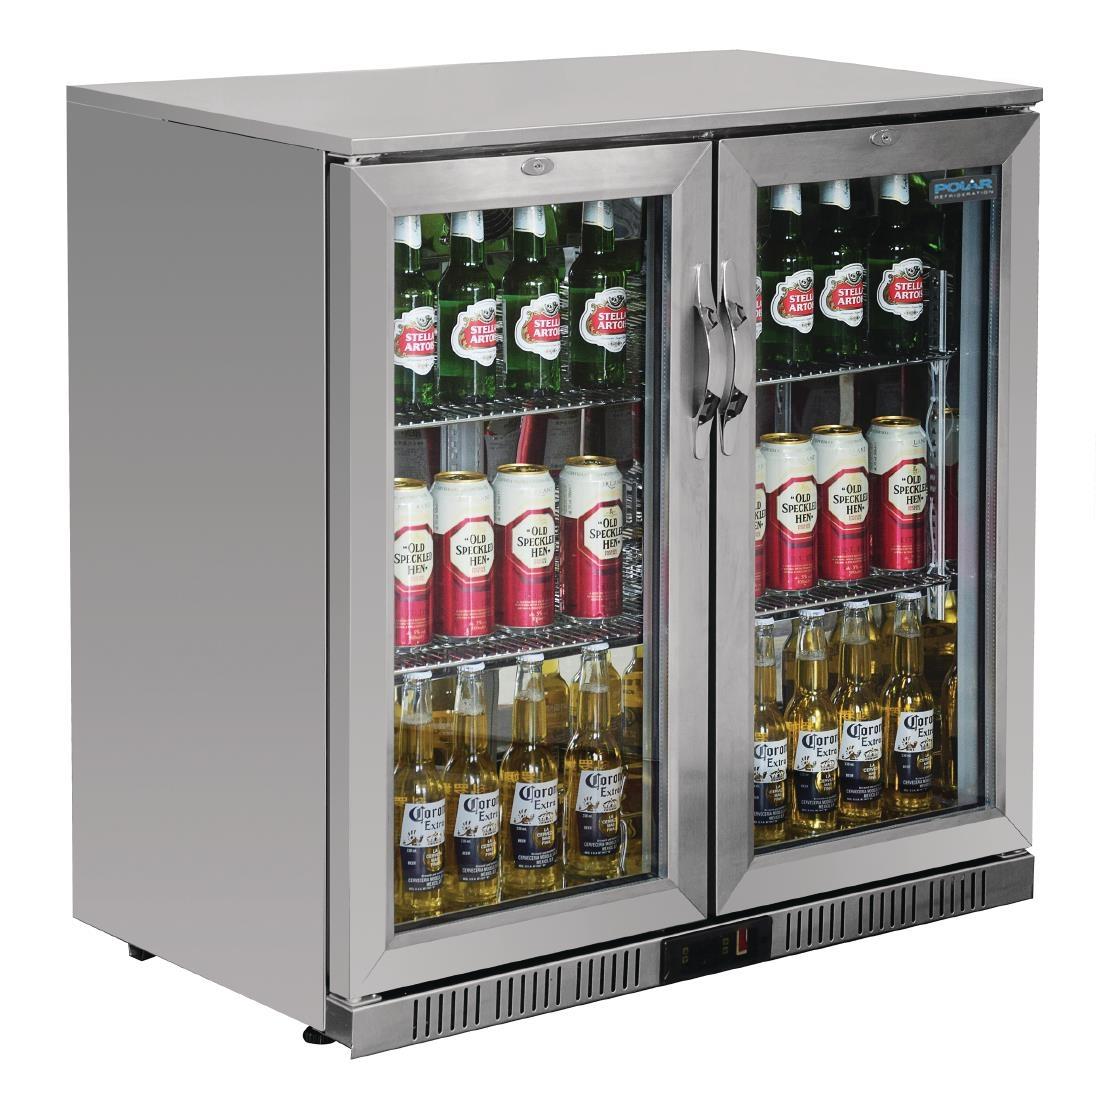 Polar G-Series Back Bar Cooler with Hinged Doors Stainless Steel 208Ltr - GL008  - 1